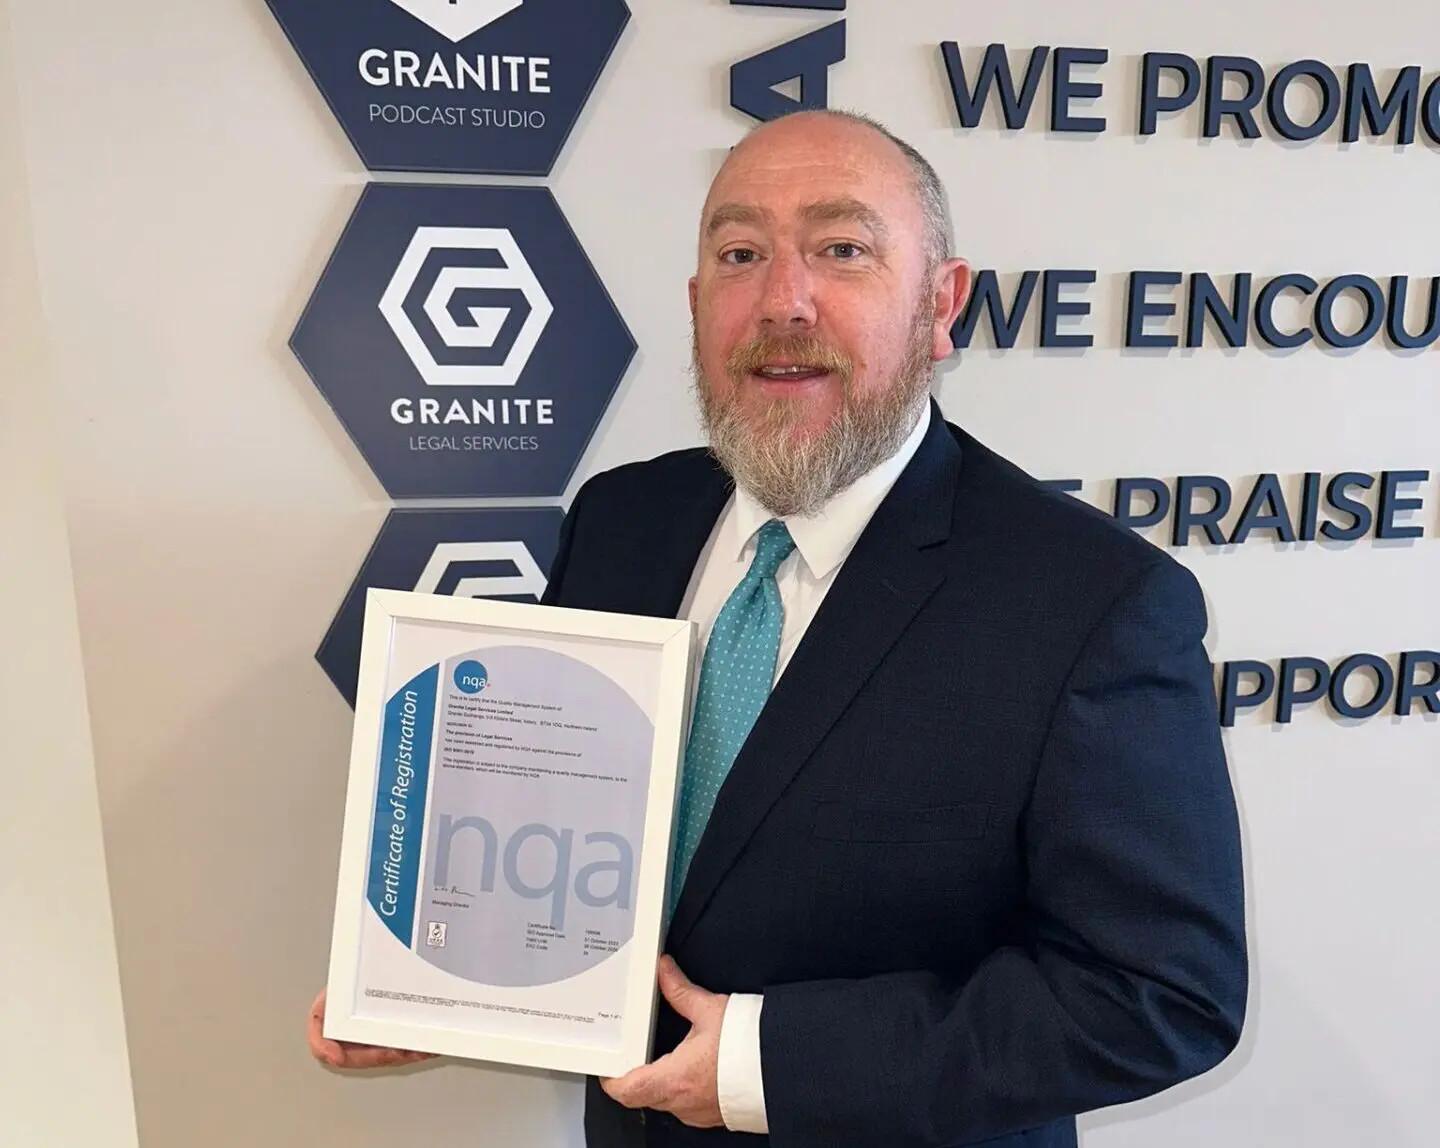 Granite Legal Services secures ISO 9001 certification